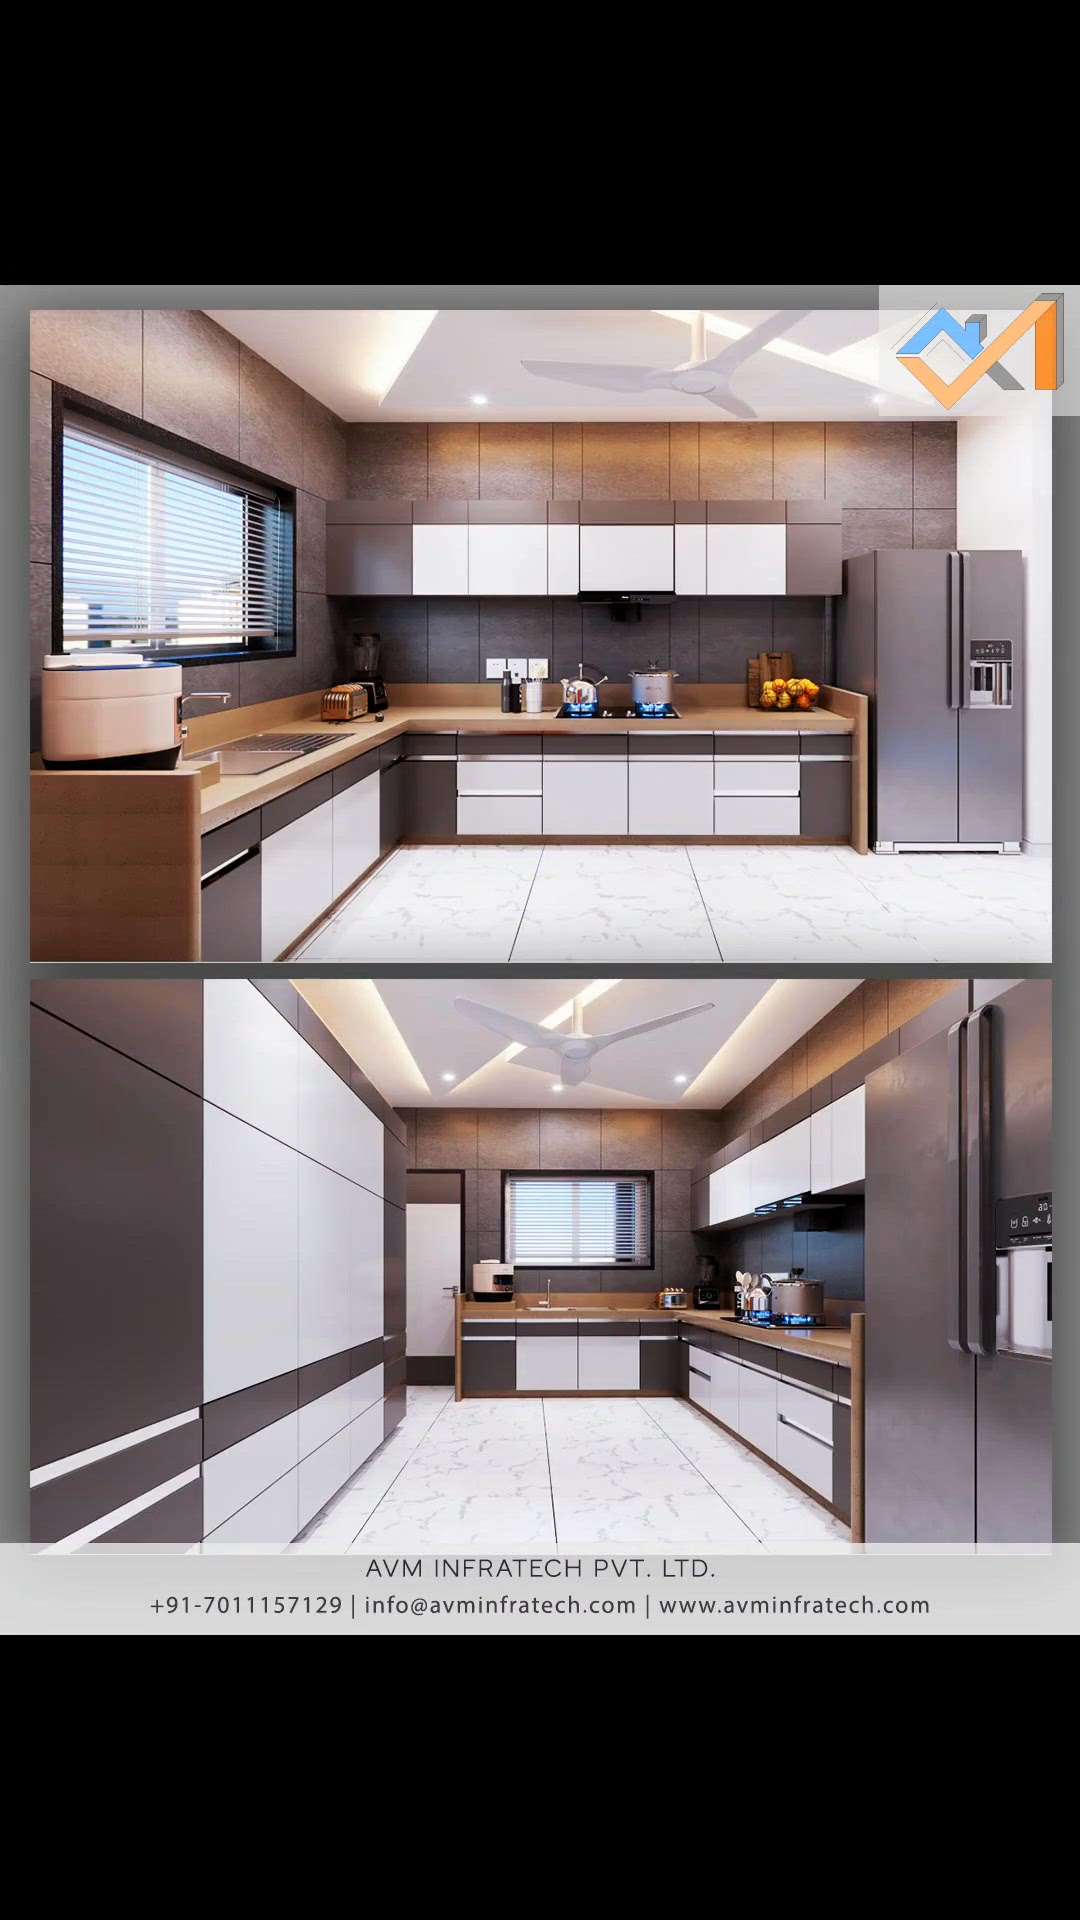 Compared to traditional kitchens, modular kitchen designs are more adaptable and flexible with respect to future needs and trends, as they can be easily dismantled. Also, with the upgradation to modular kitchen interior designs, custom options like cutlery drawers, thali basket, and rolling shutter storage for everyday-use appliances like beaters, blenders, mixer grinders etc., can be easily stored and efficiently organised.


Follow us for more such amazing updates. 
.
.
#modular #modularhome #modularkitchen #modularhomes #modularhouse #kitchen #design #flat #house #goals #avminfratech #food #foodie #3d #drawing #2d #plan #detail #détails #detailsmatter #interiordetails